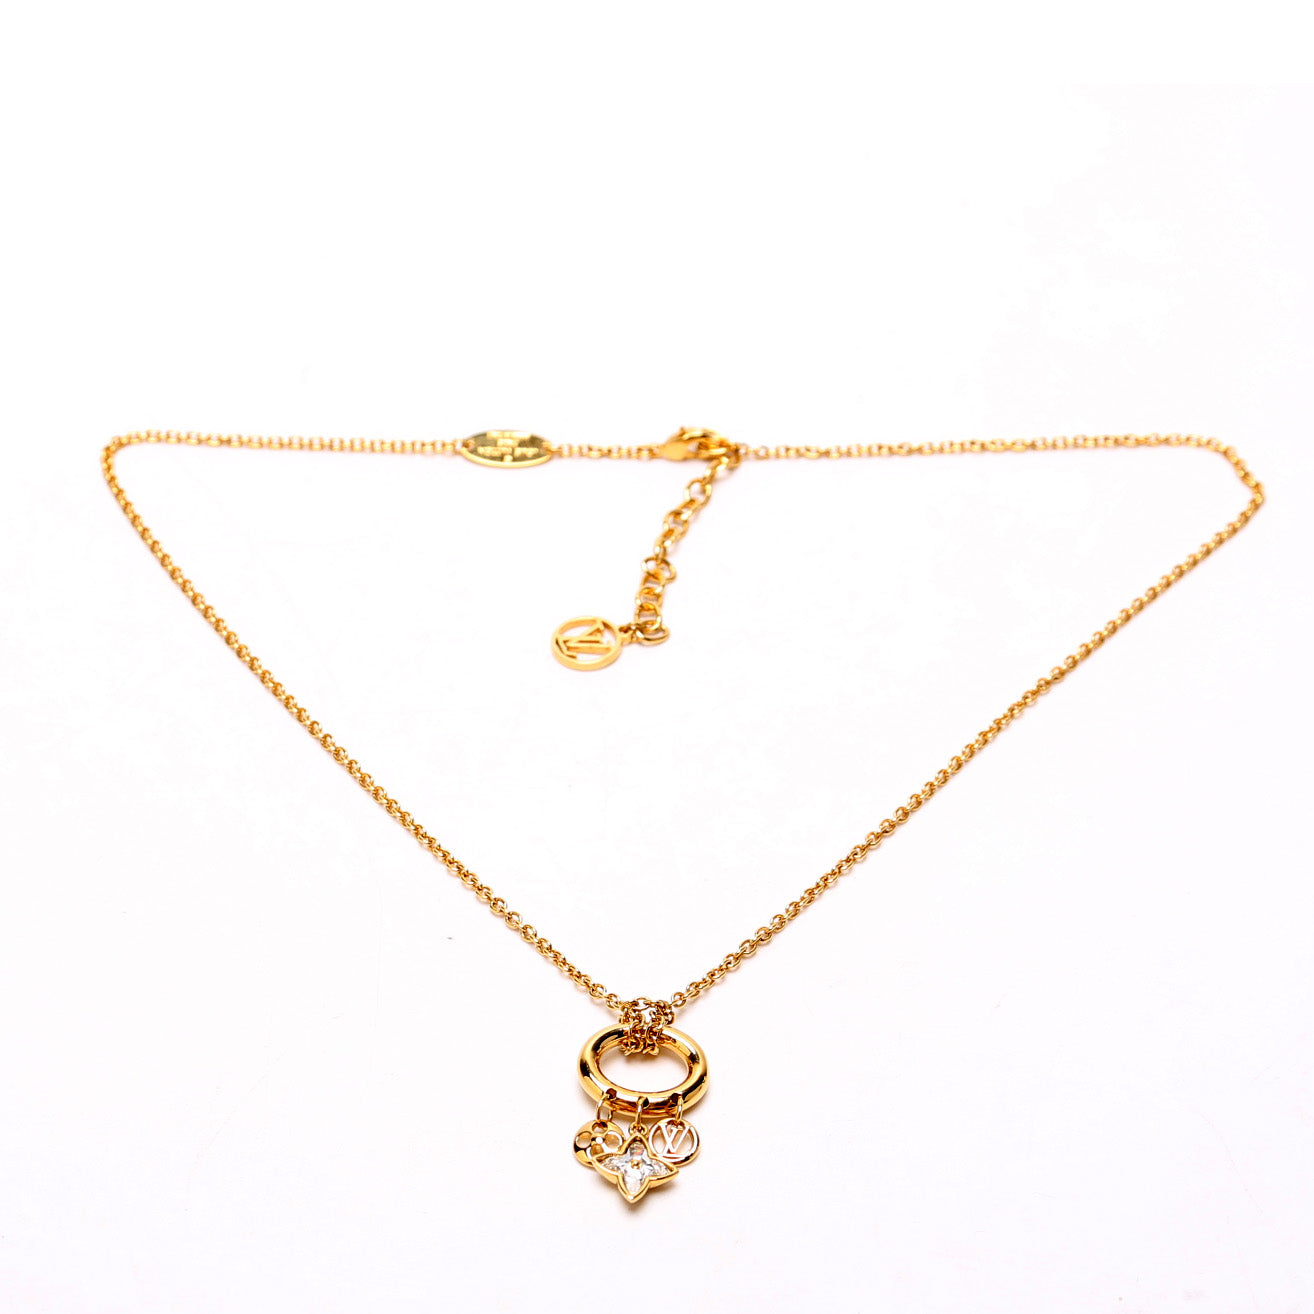 Shop Louis Vuitton MONOGRAM 2021-22FW Blooming strass necklace (M68374) by  nordsud | BUYMA